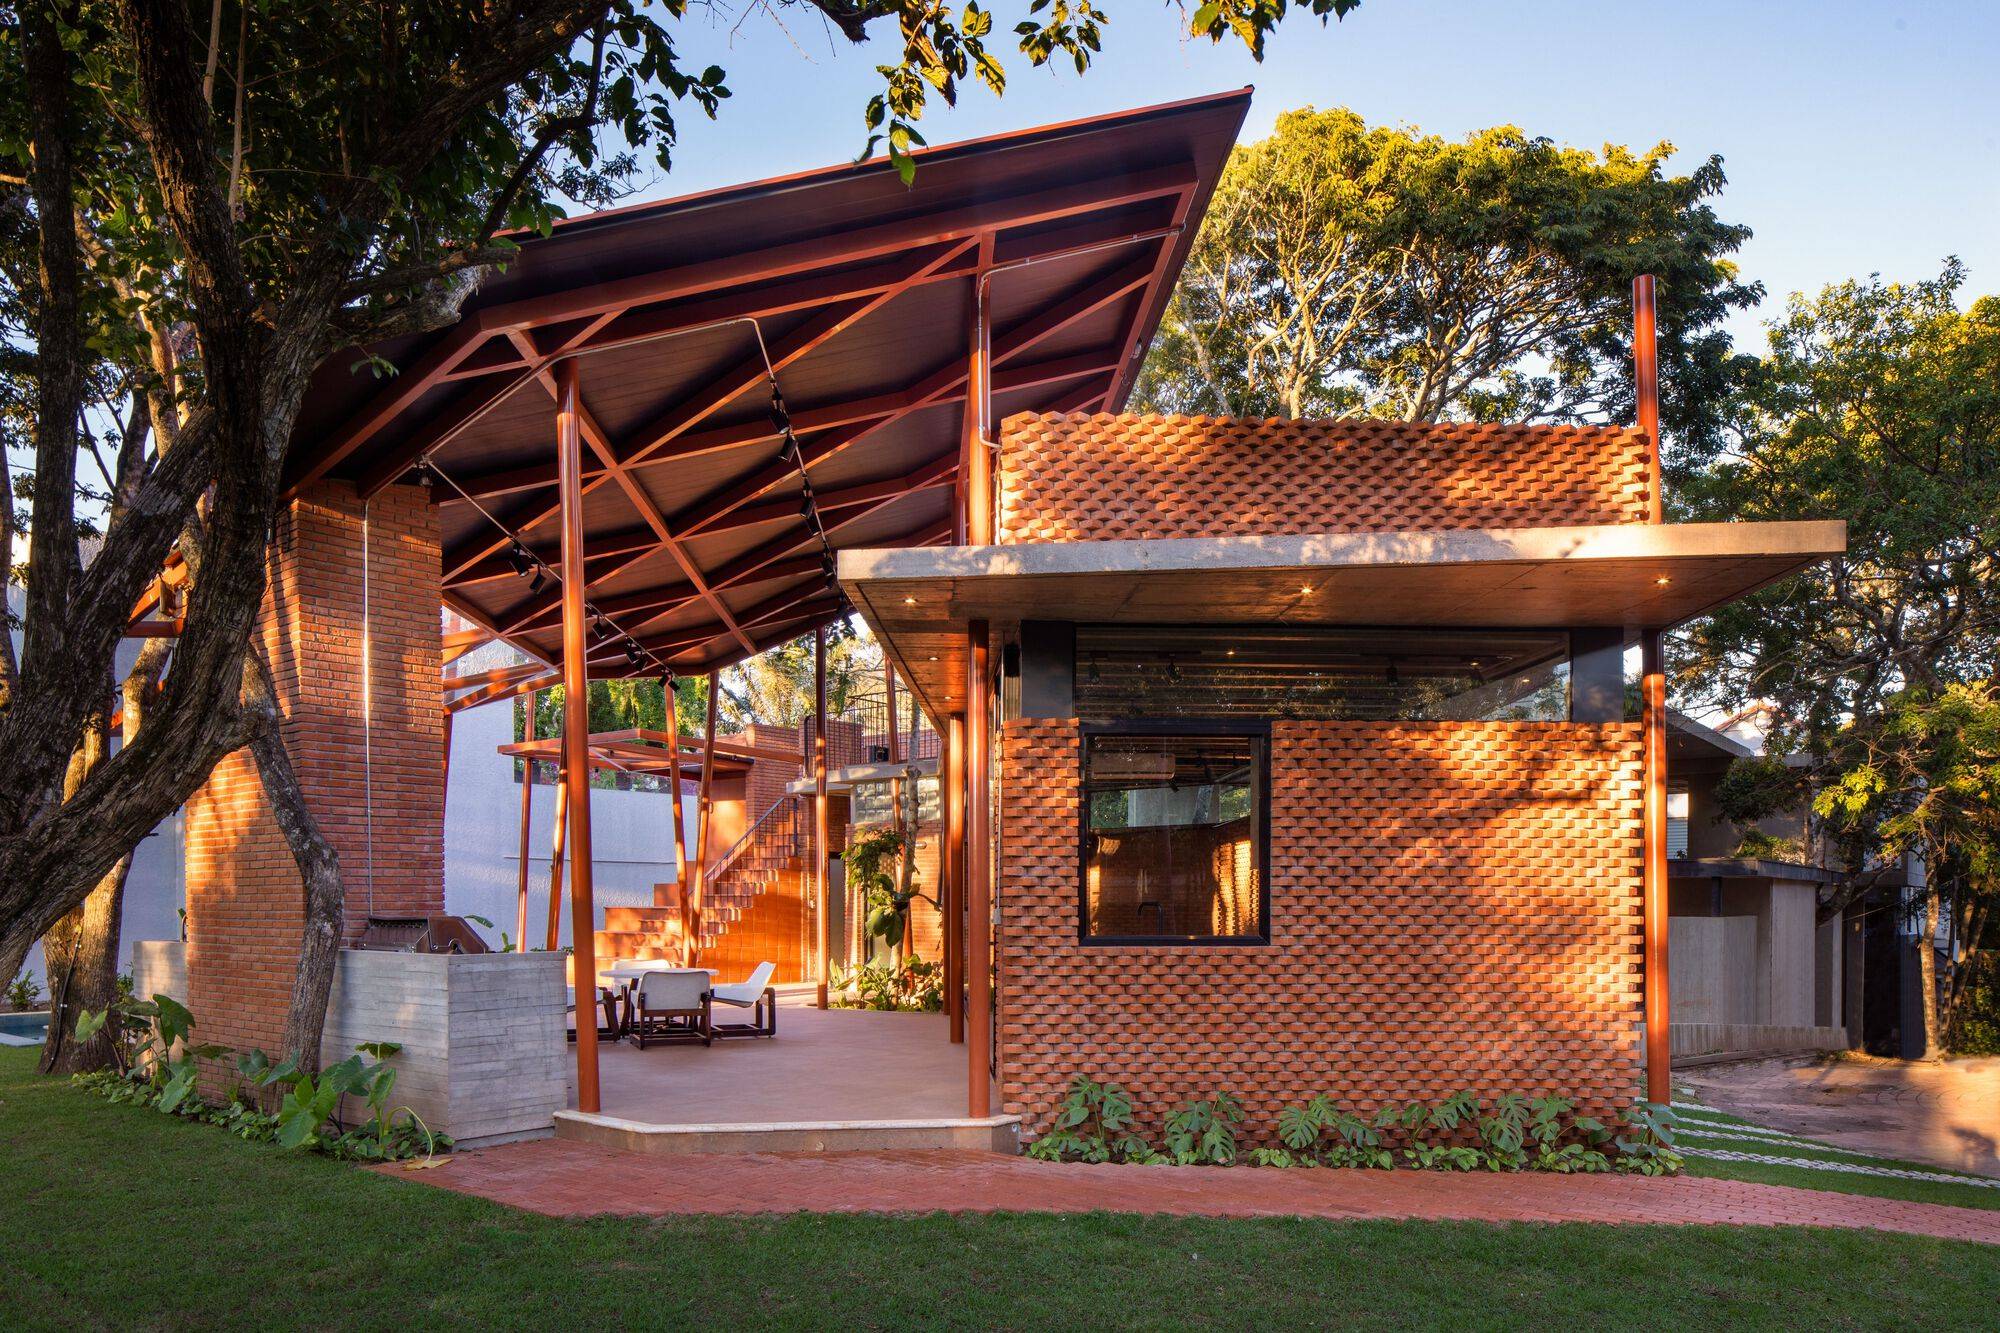 Traditional-building-materials-are-combined-with-modern-farm-for-this-backyard-retreat-created-using-clay-bricks-24807